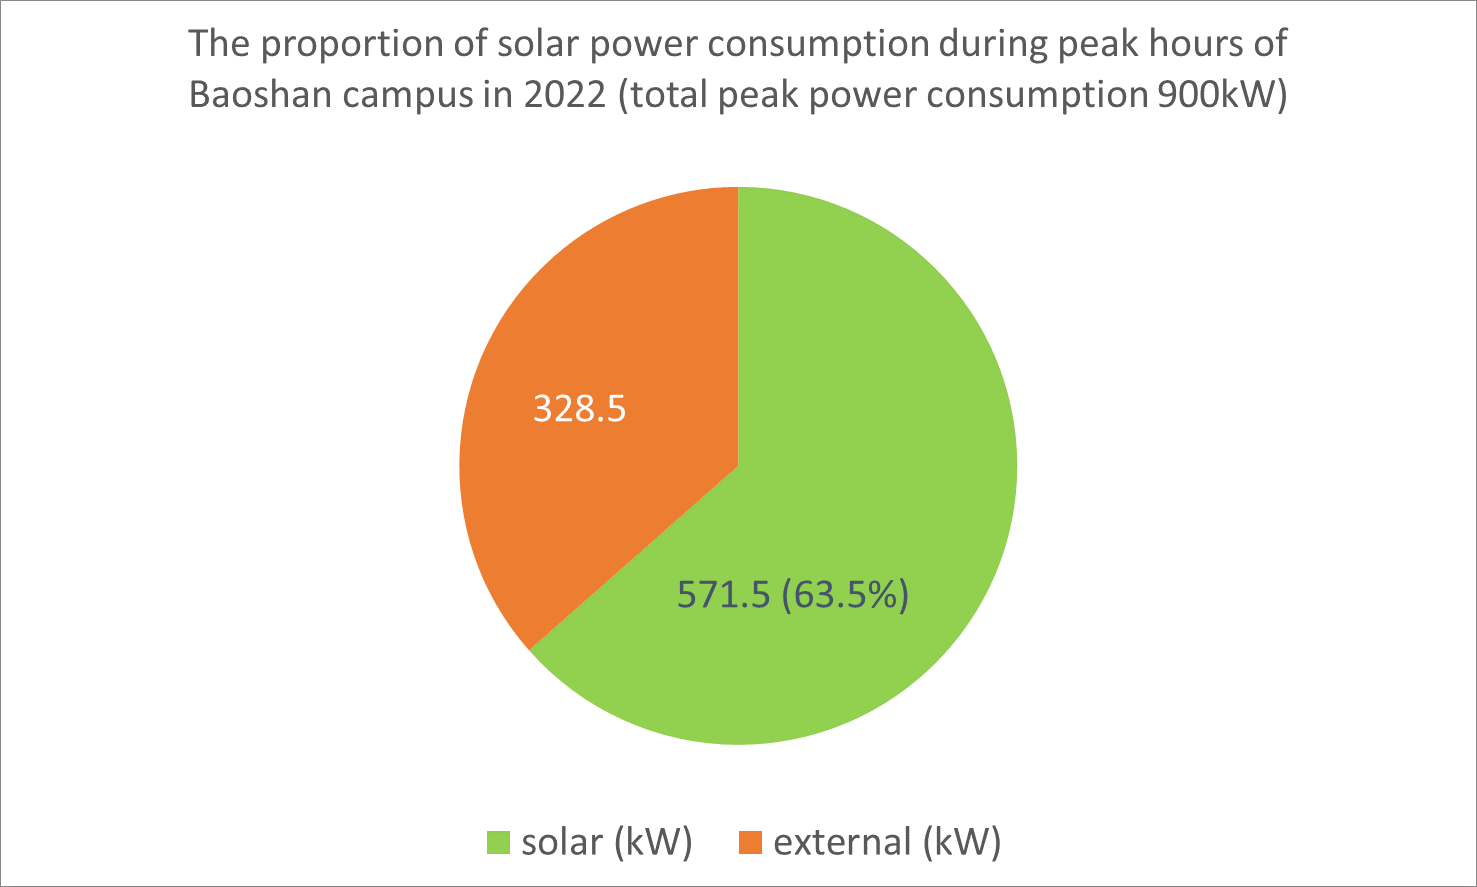 Figure 6. The proportion of solar power consumption during peak hours of the Baoshan campus in 2022